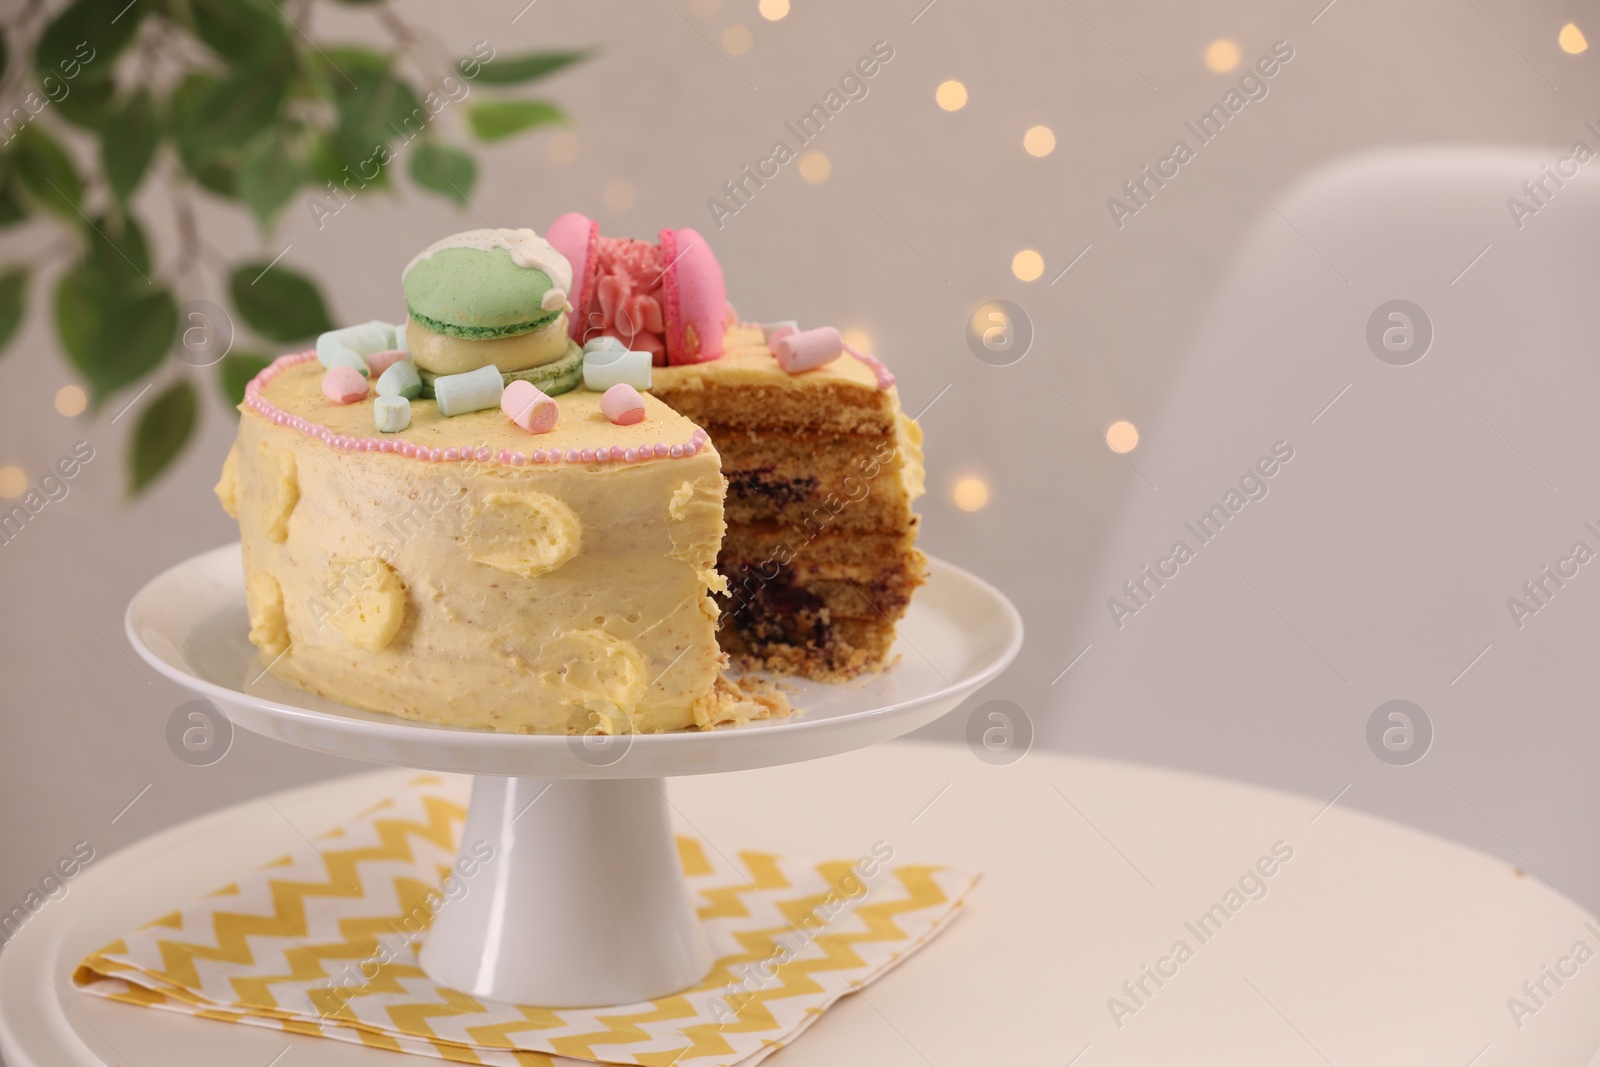 Photo of Delicious cake decorated with macarons and marshmallows on white table against blurred lights, space for text